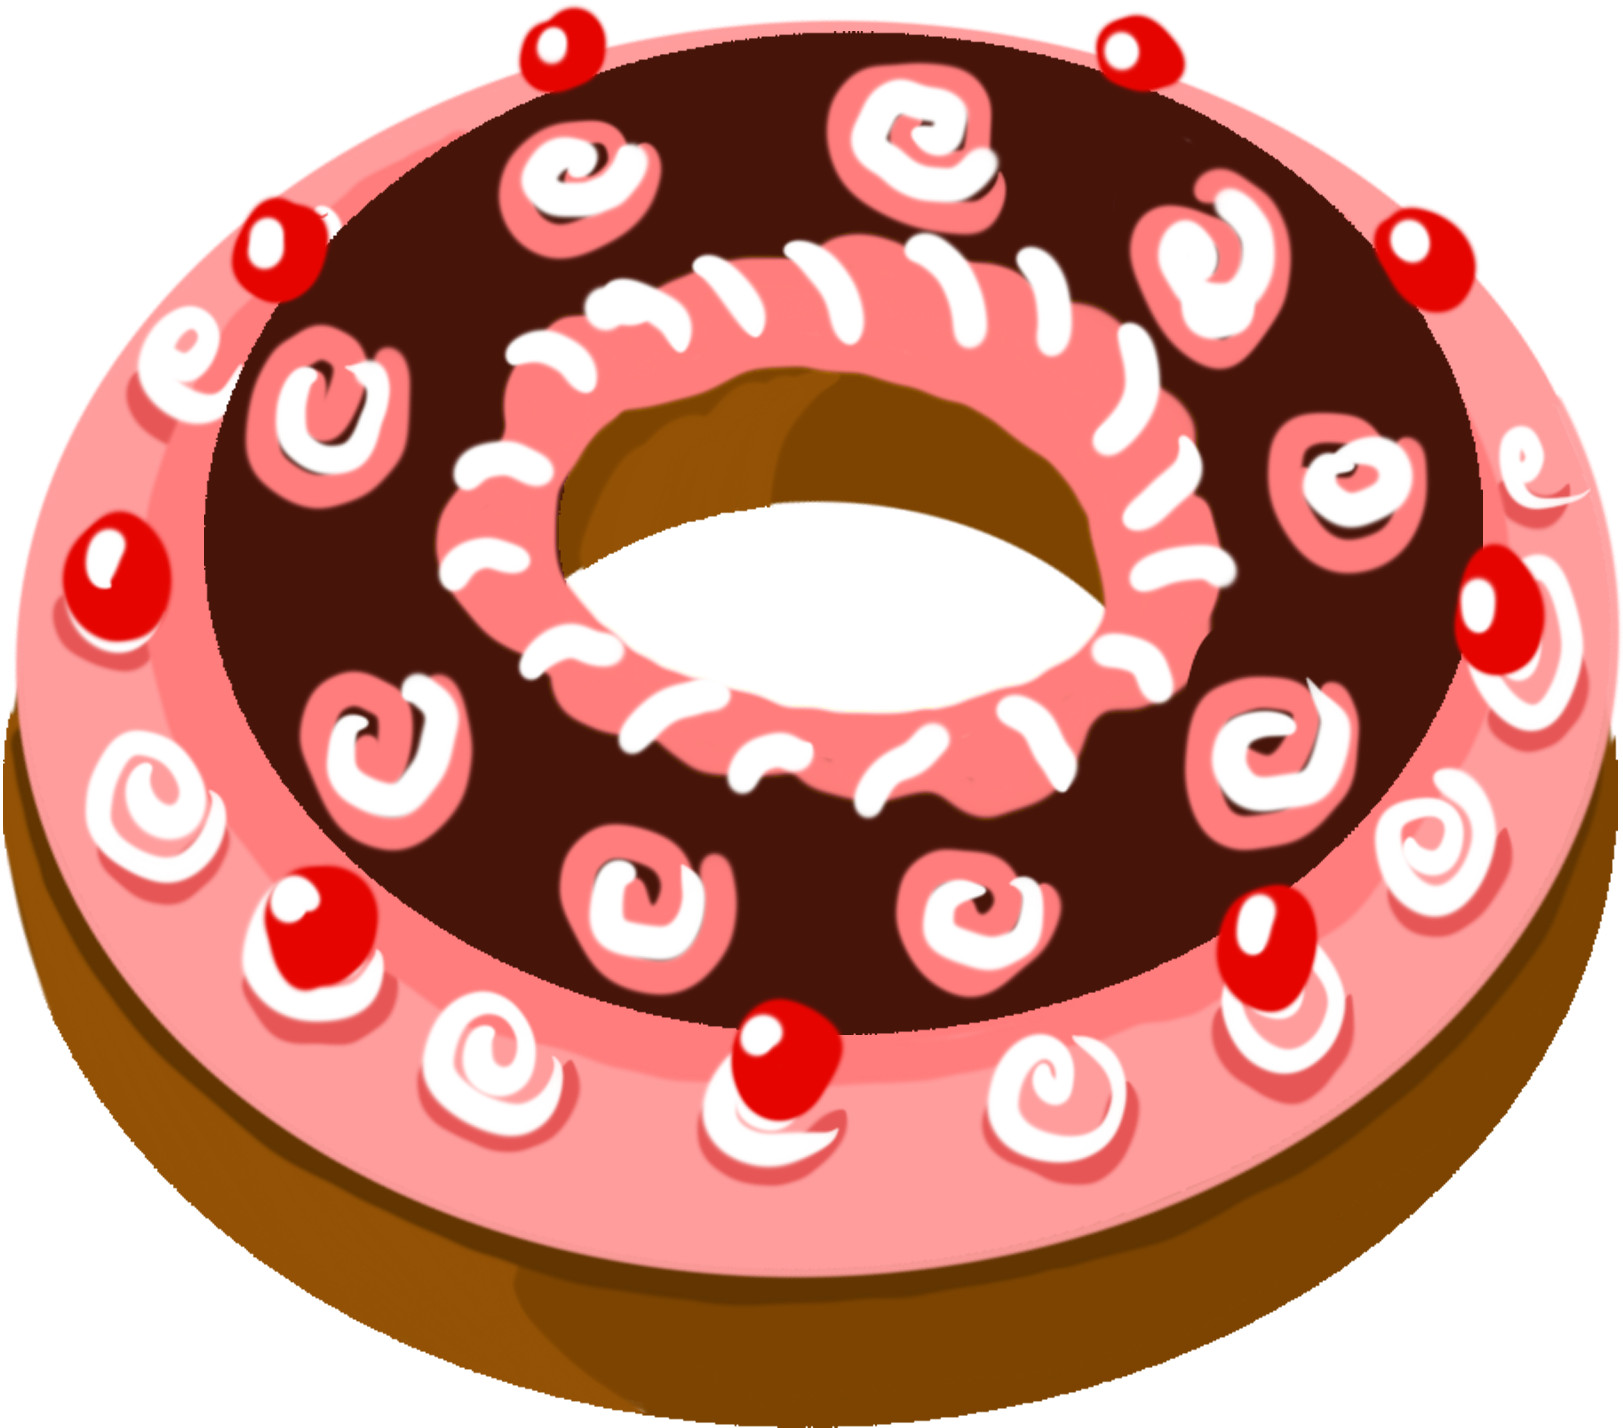 Decorated Chocolate Donut Illustration PNG